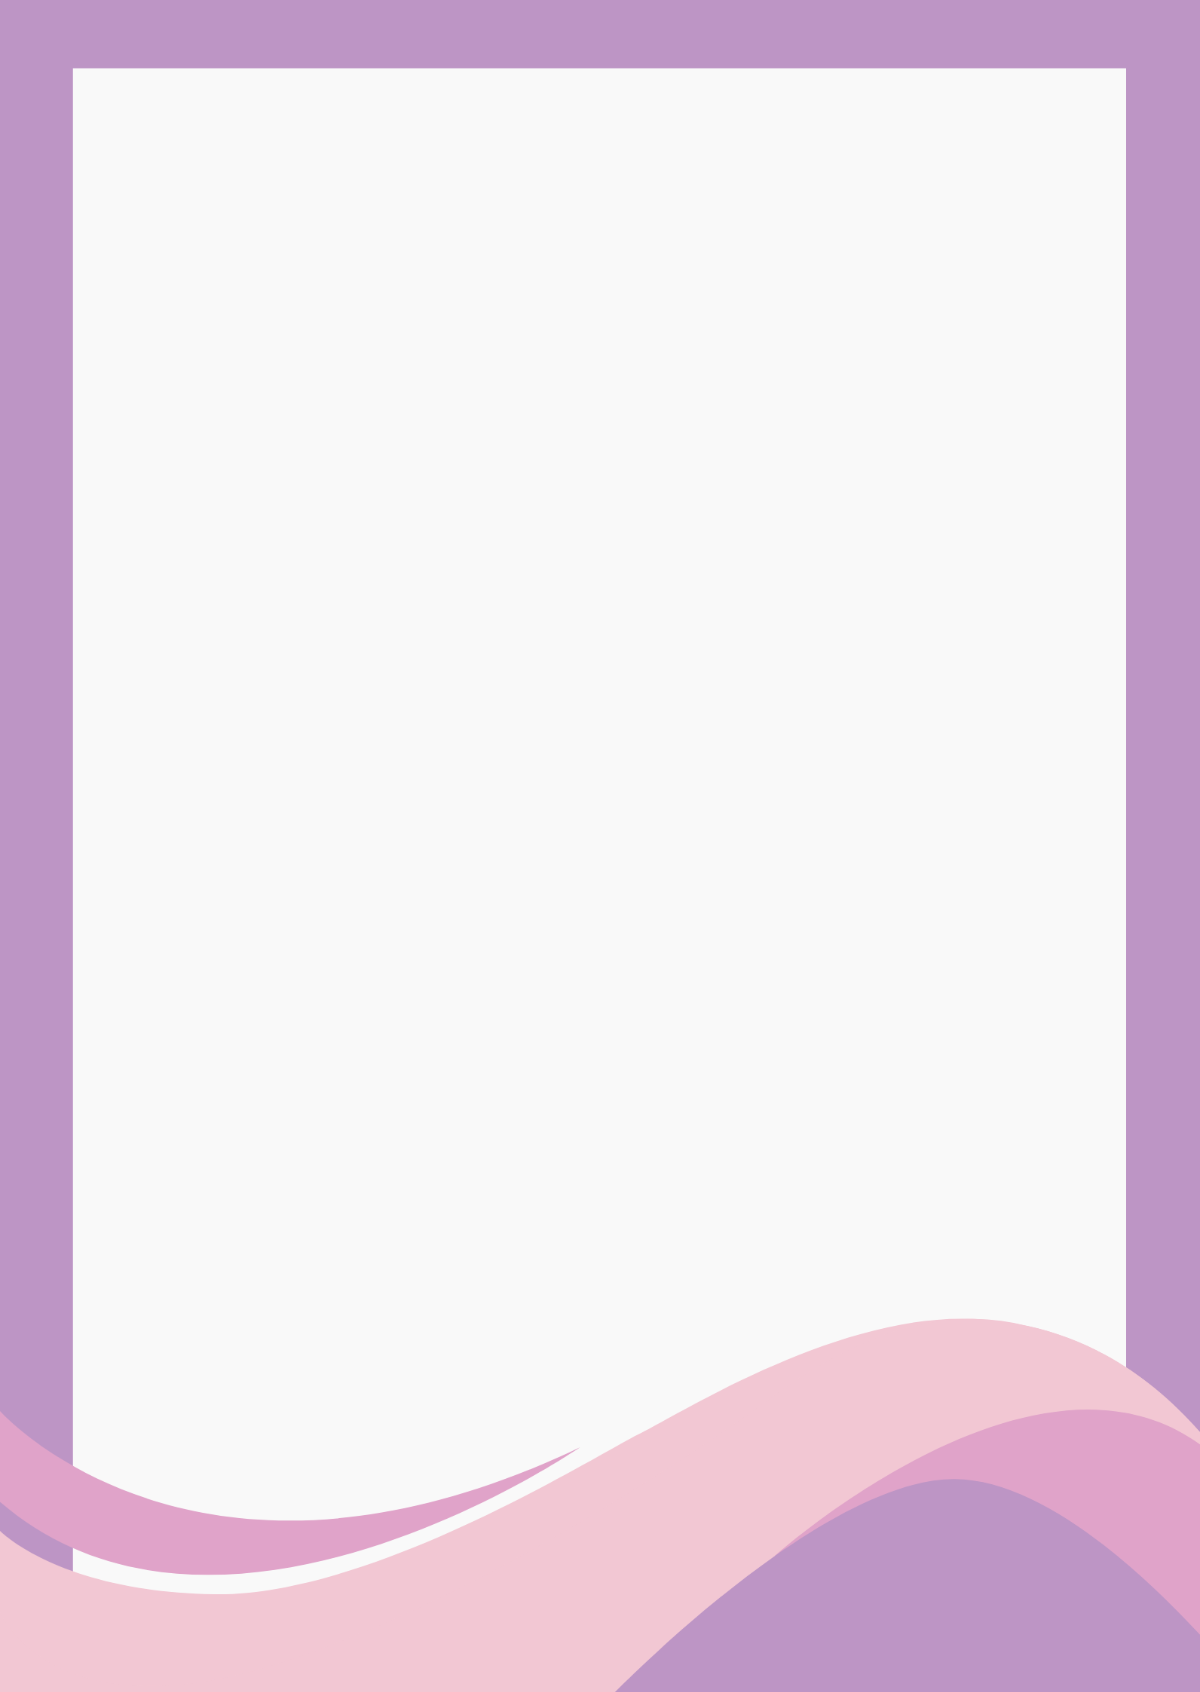 Modern Page Border Template